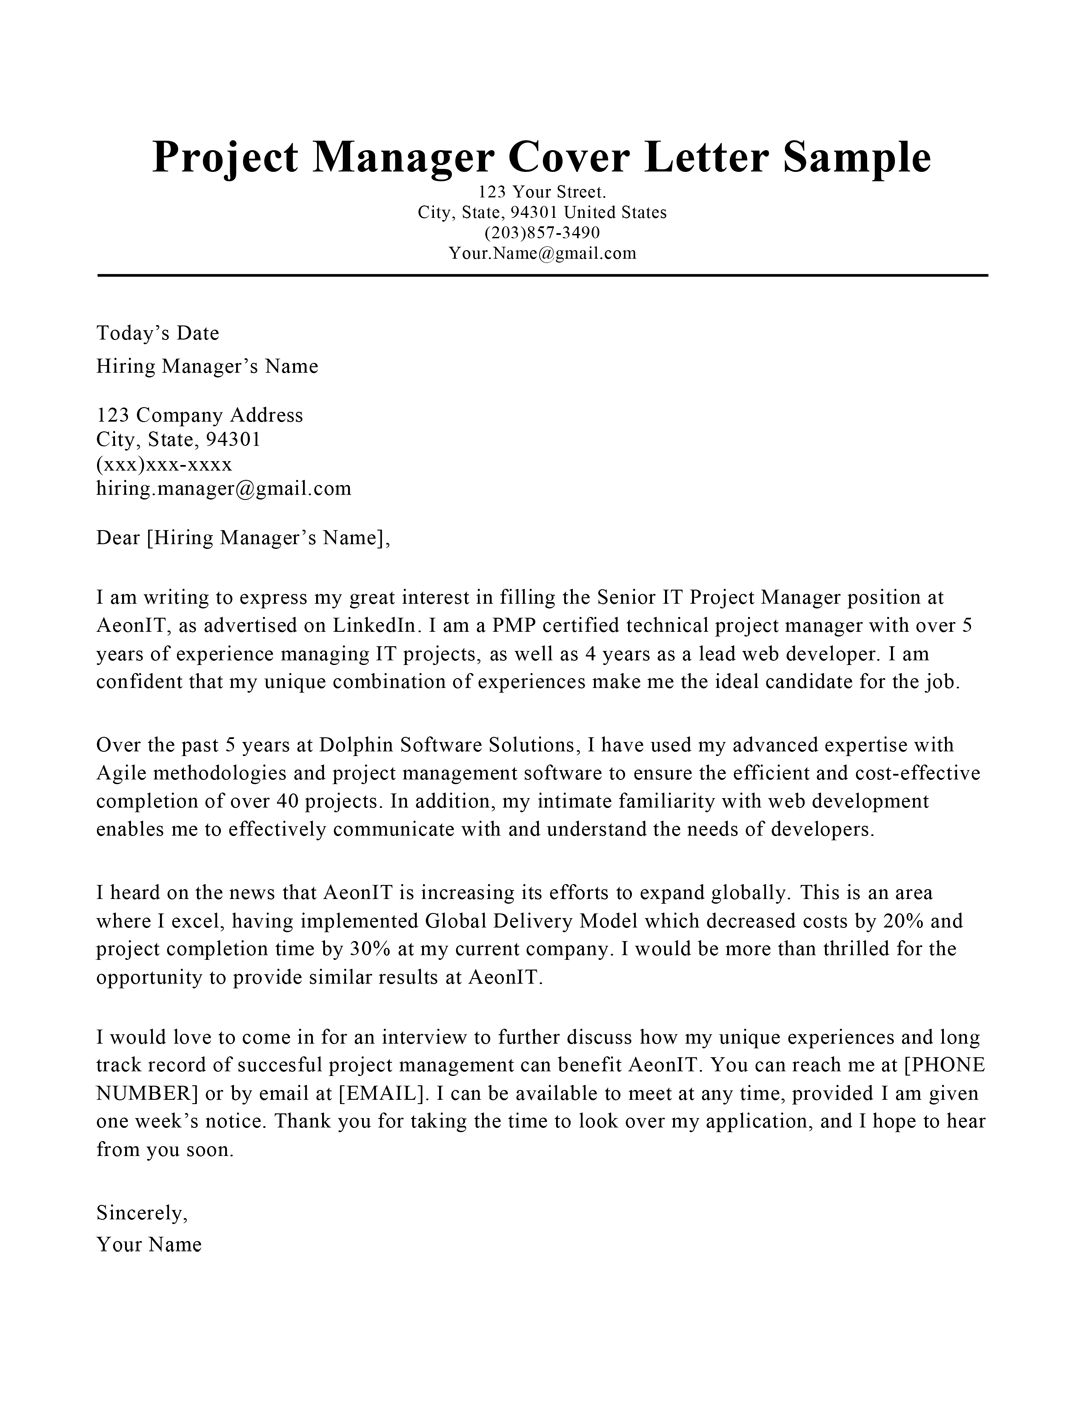 project managers cover letter samples